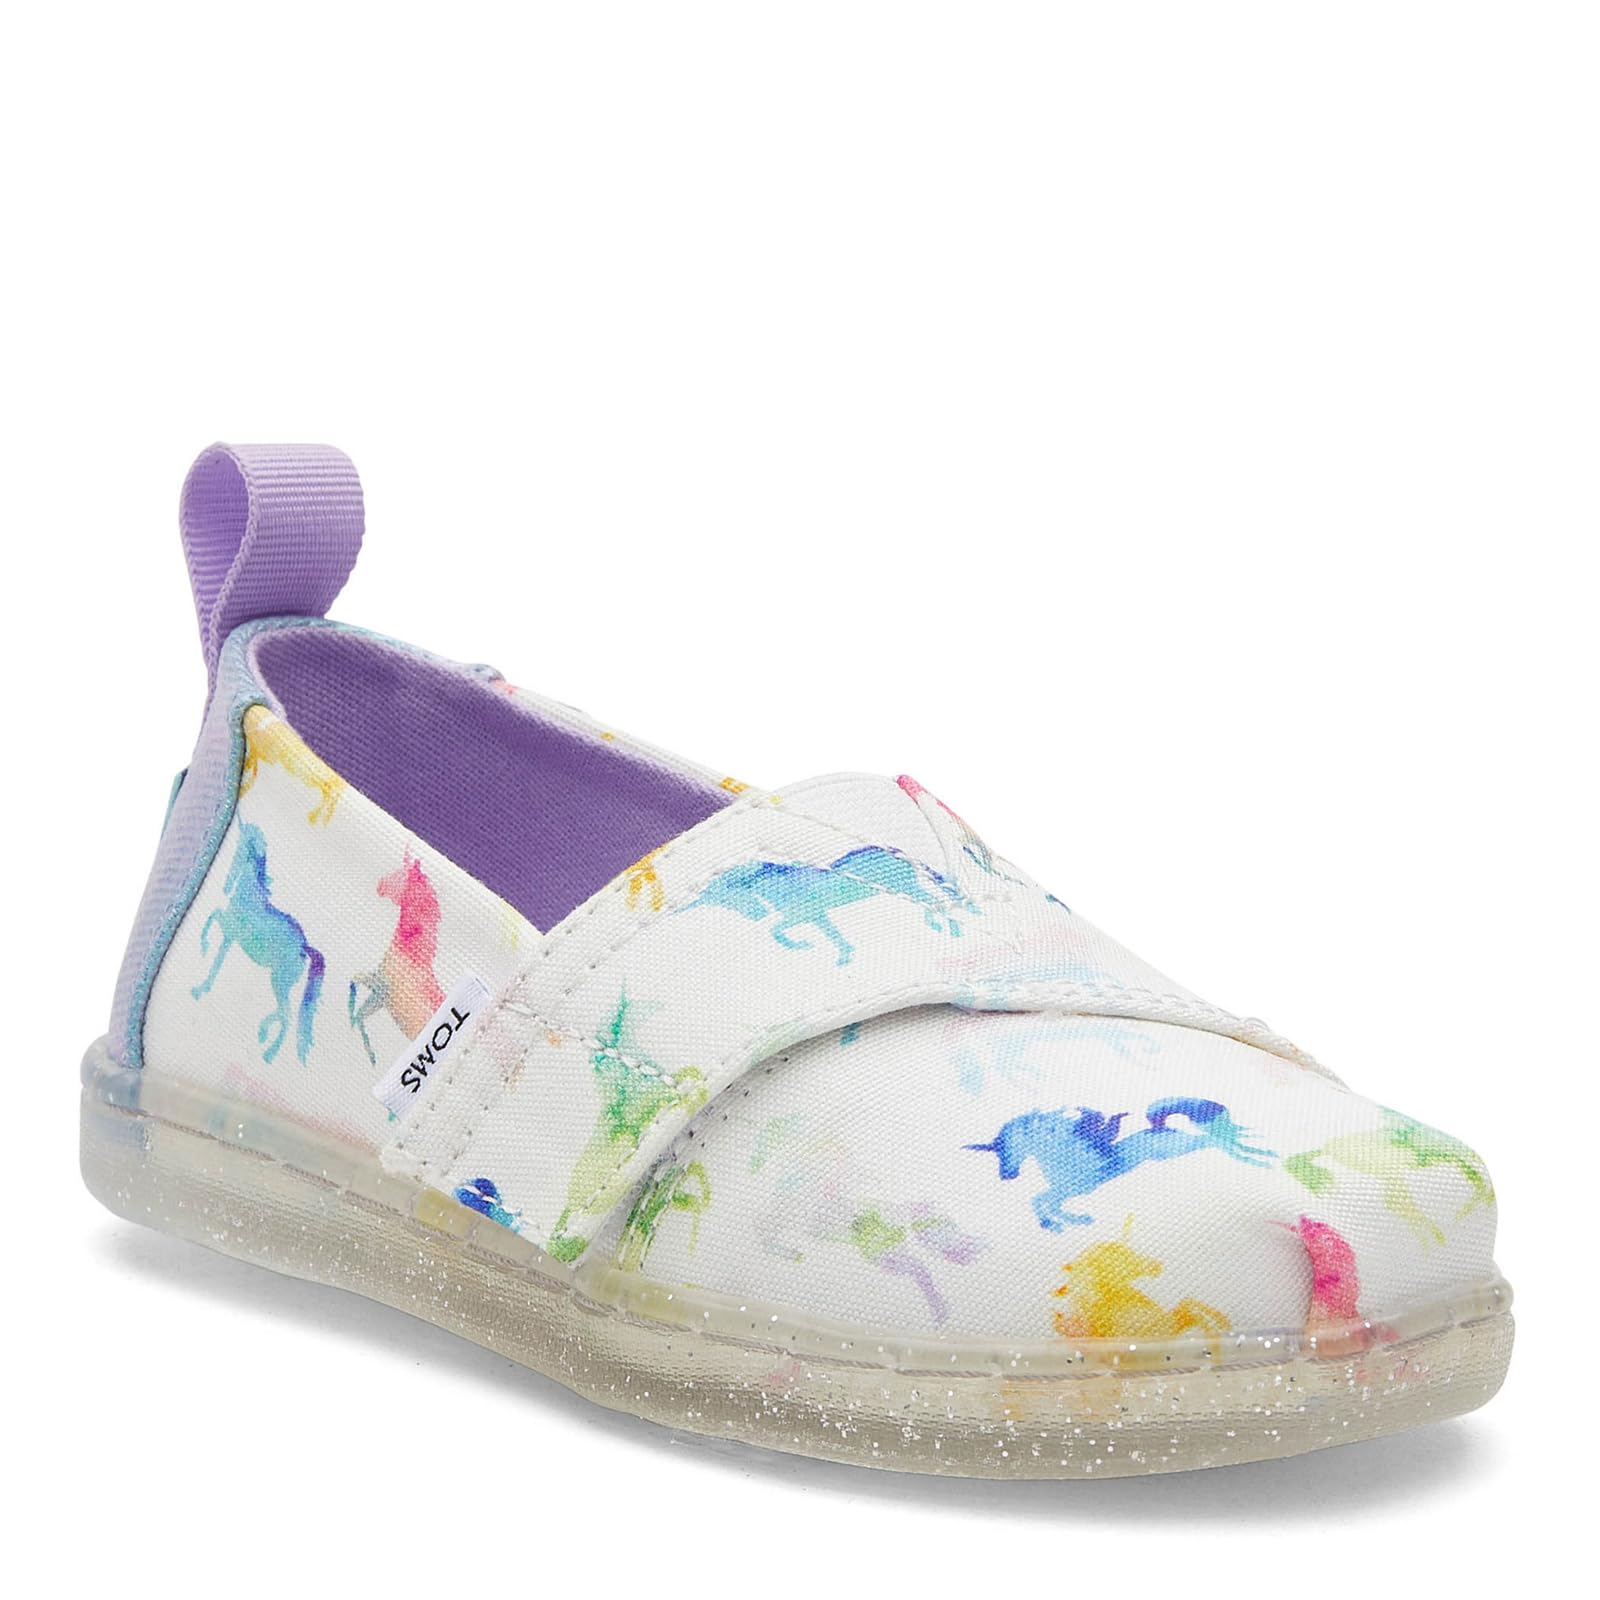 TOMS Girls Alpargata Loafer Flat, White Watercolor Ombre Unicorns, 4 Toddler